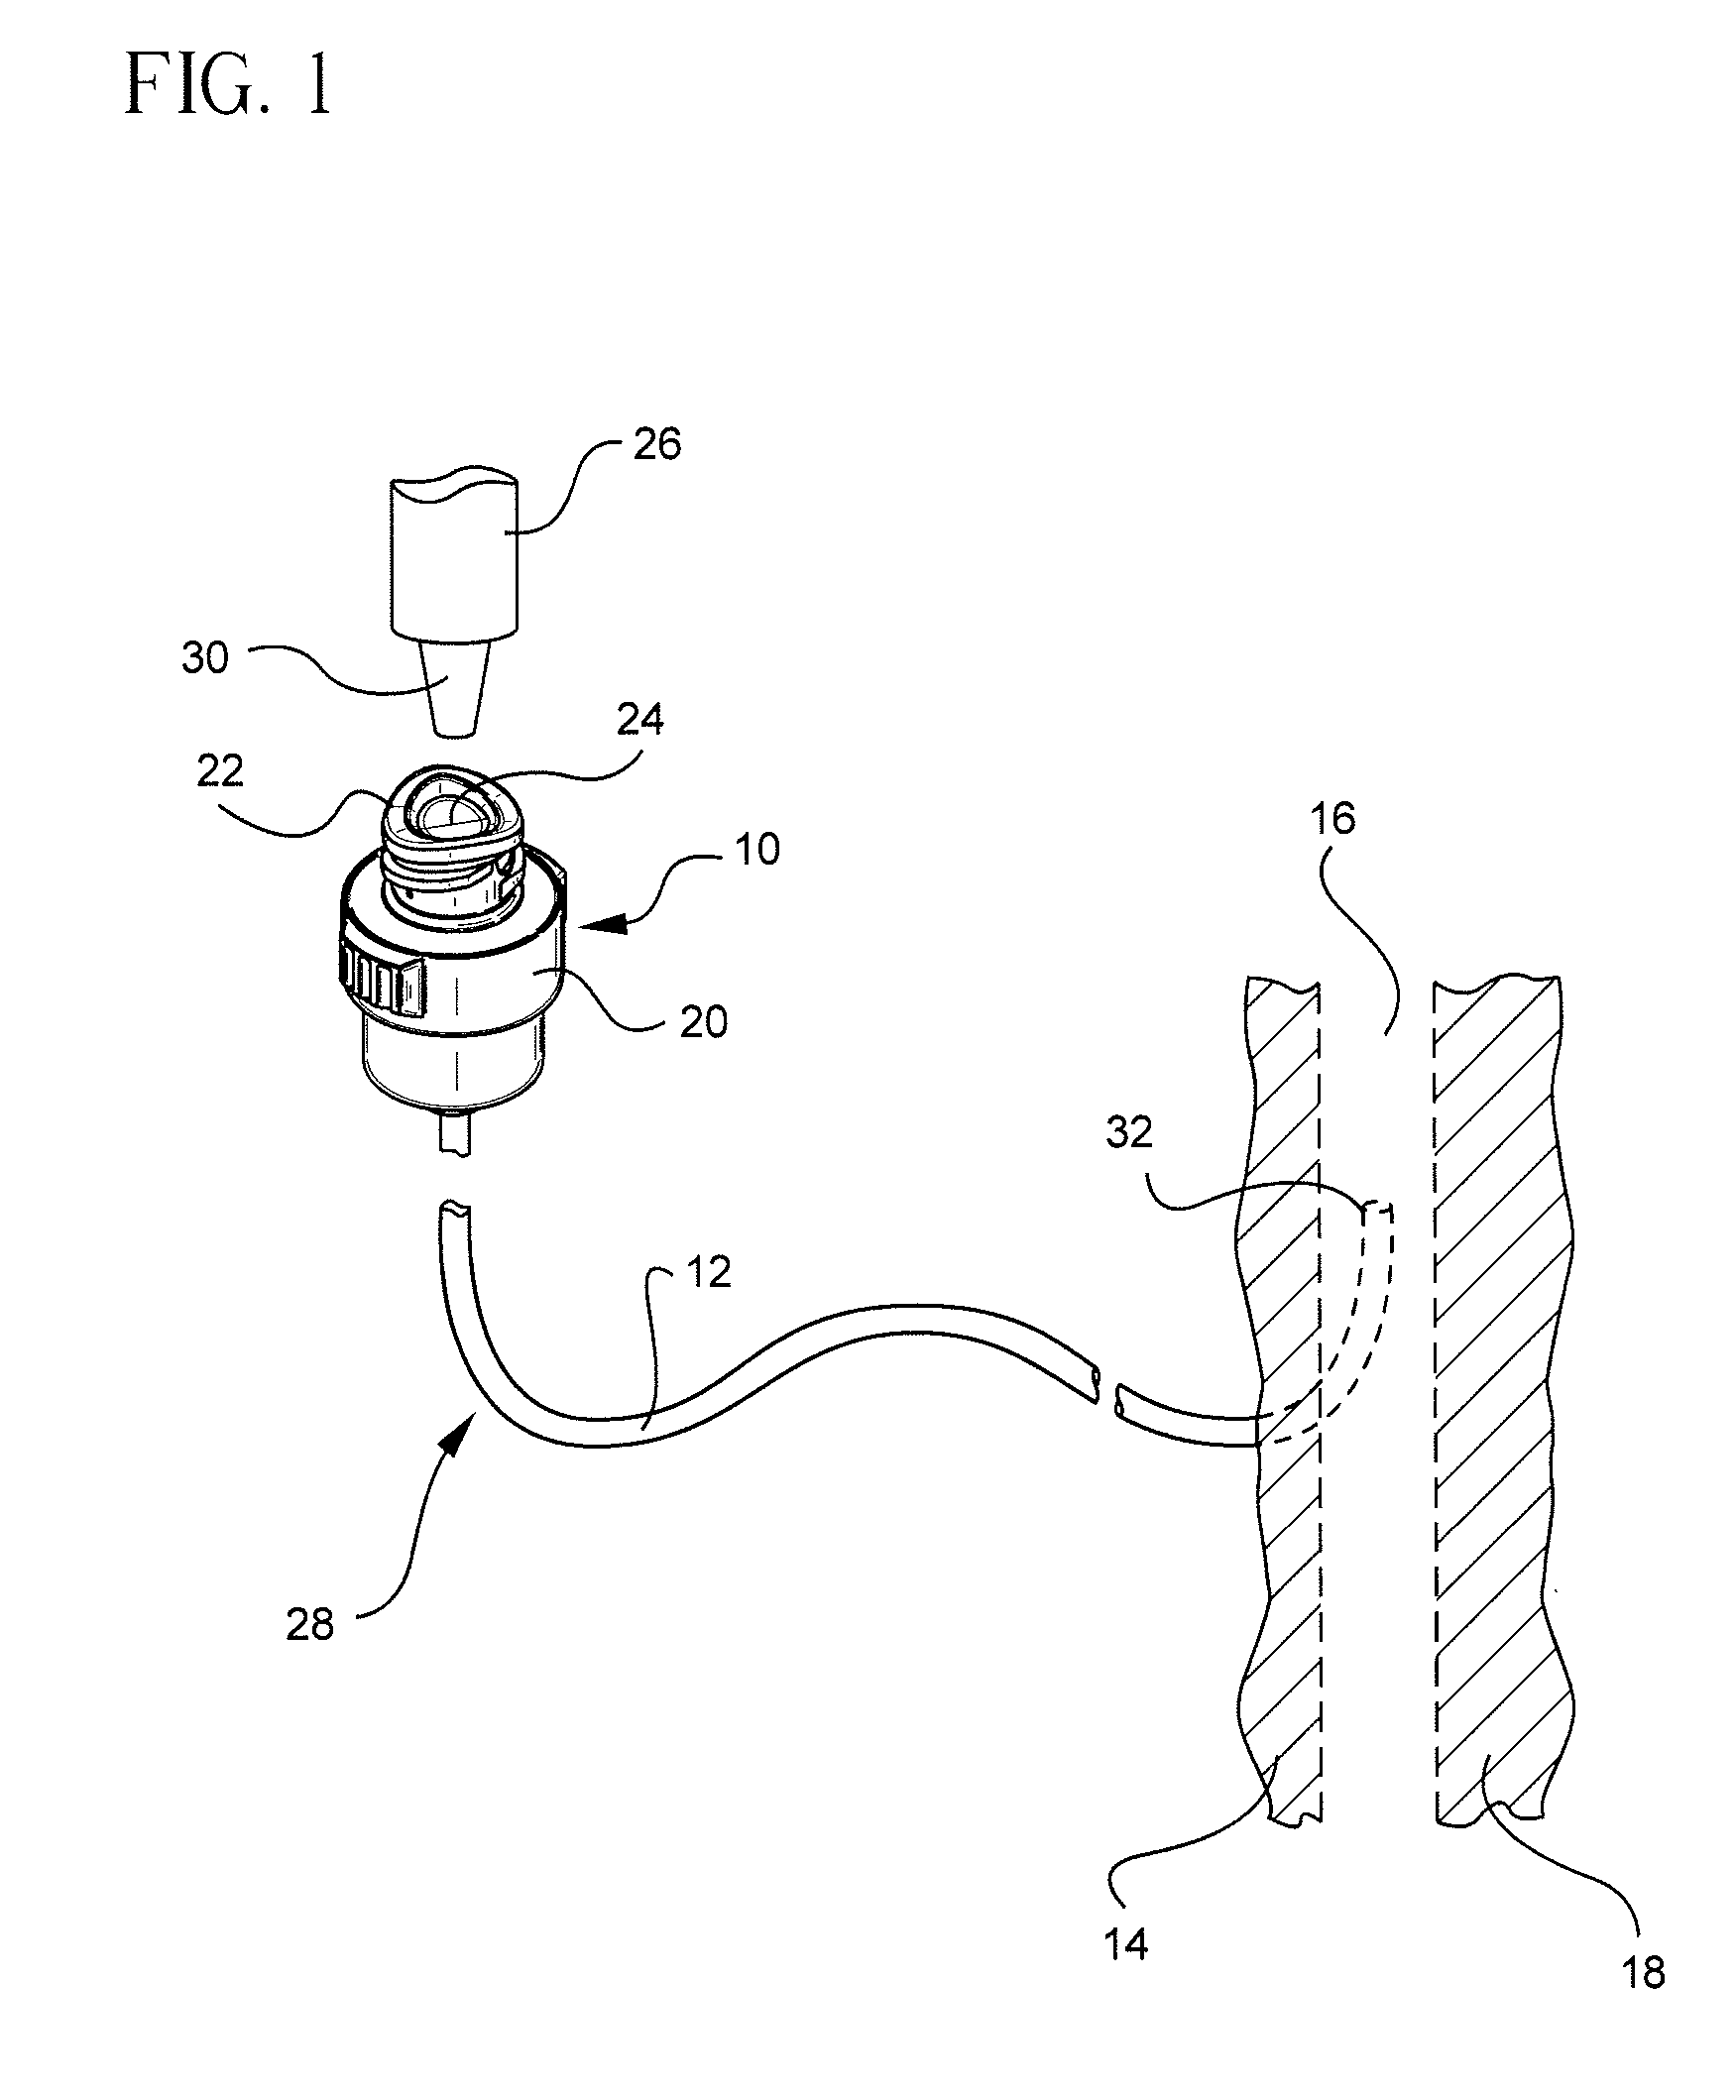 Vascular access device gas displacement